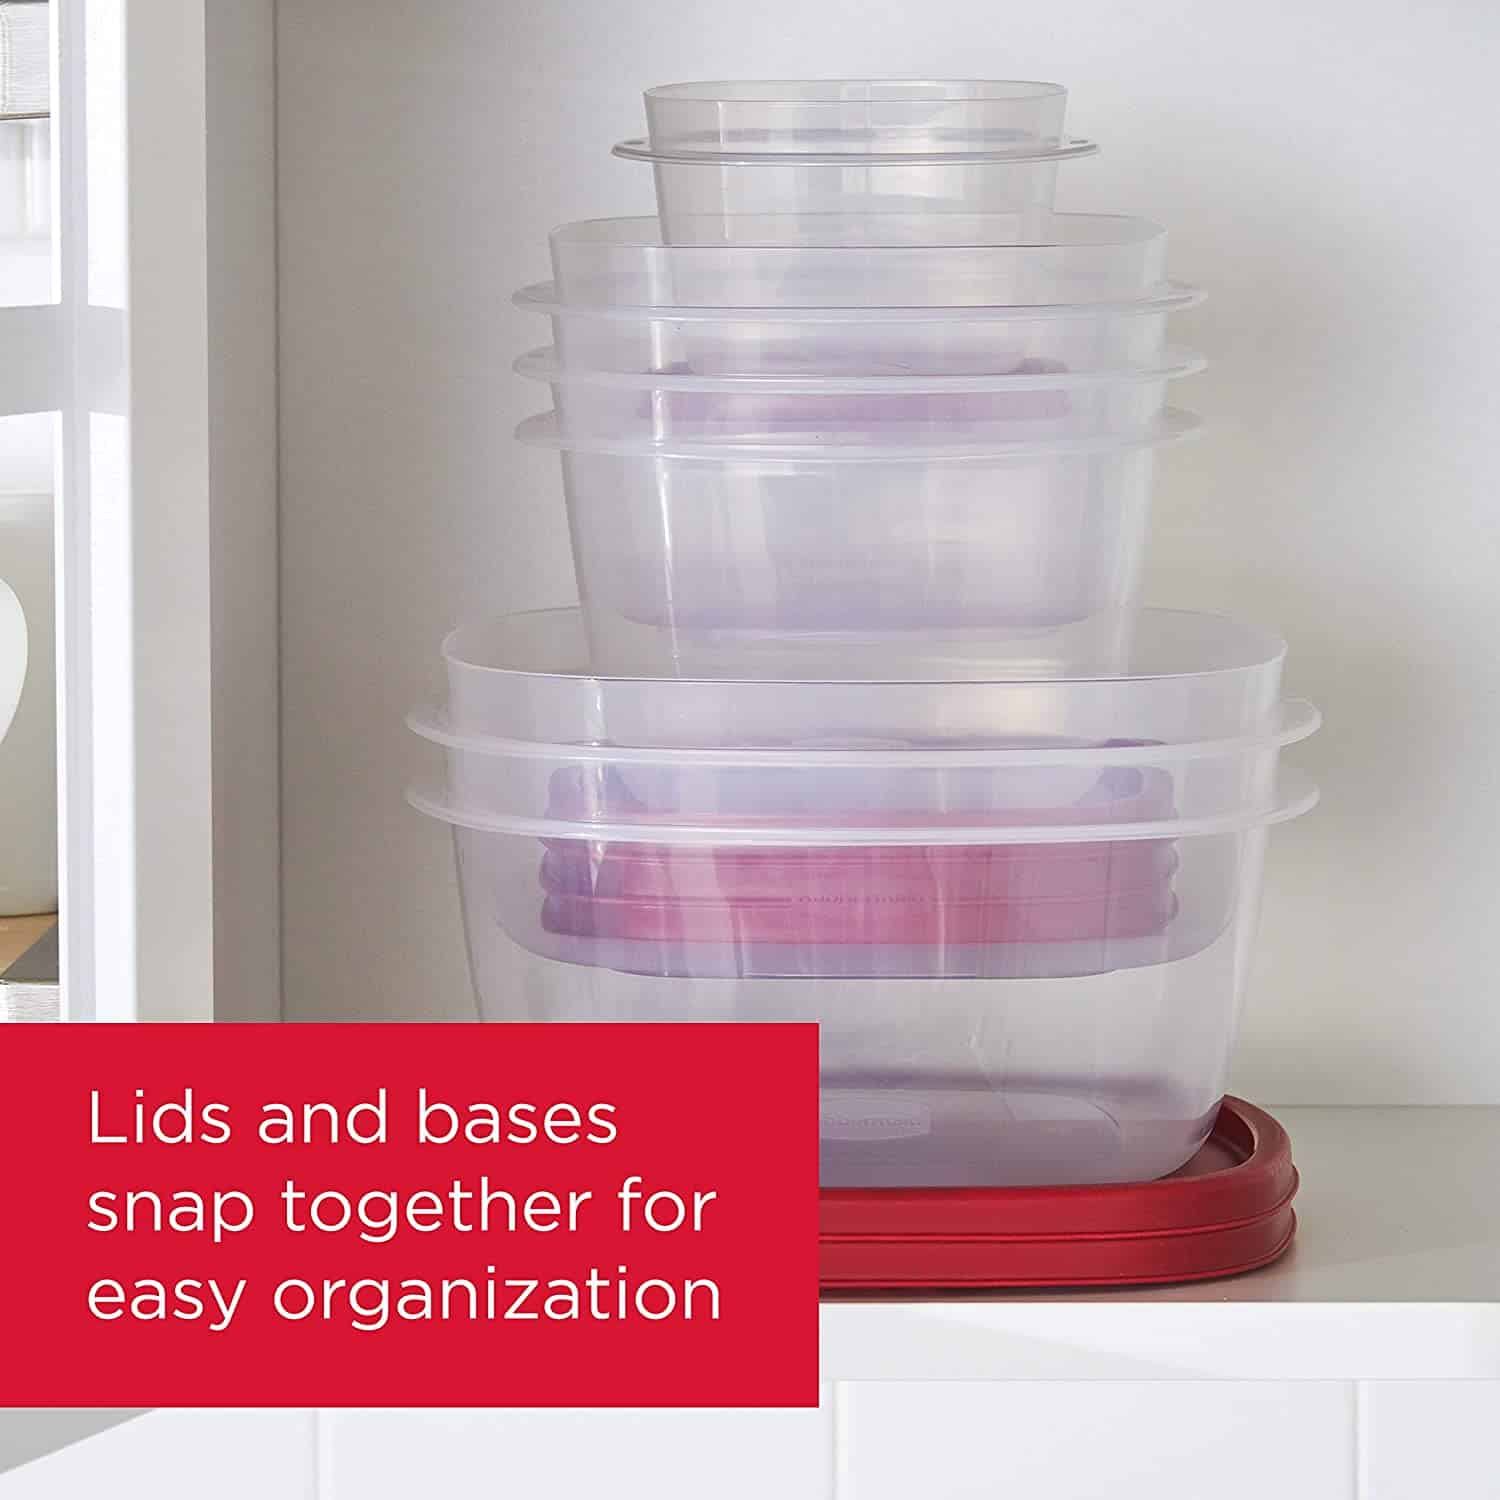 4 Easy Ways to Organise your Tupperware and Food Storage Containers